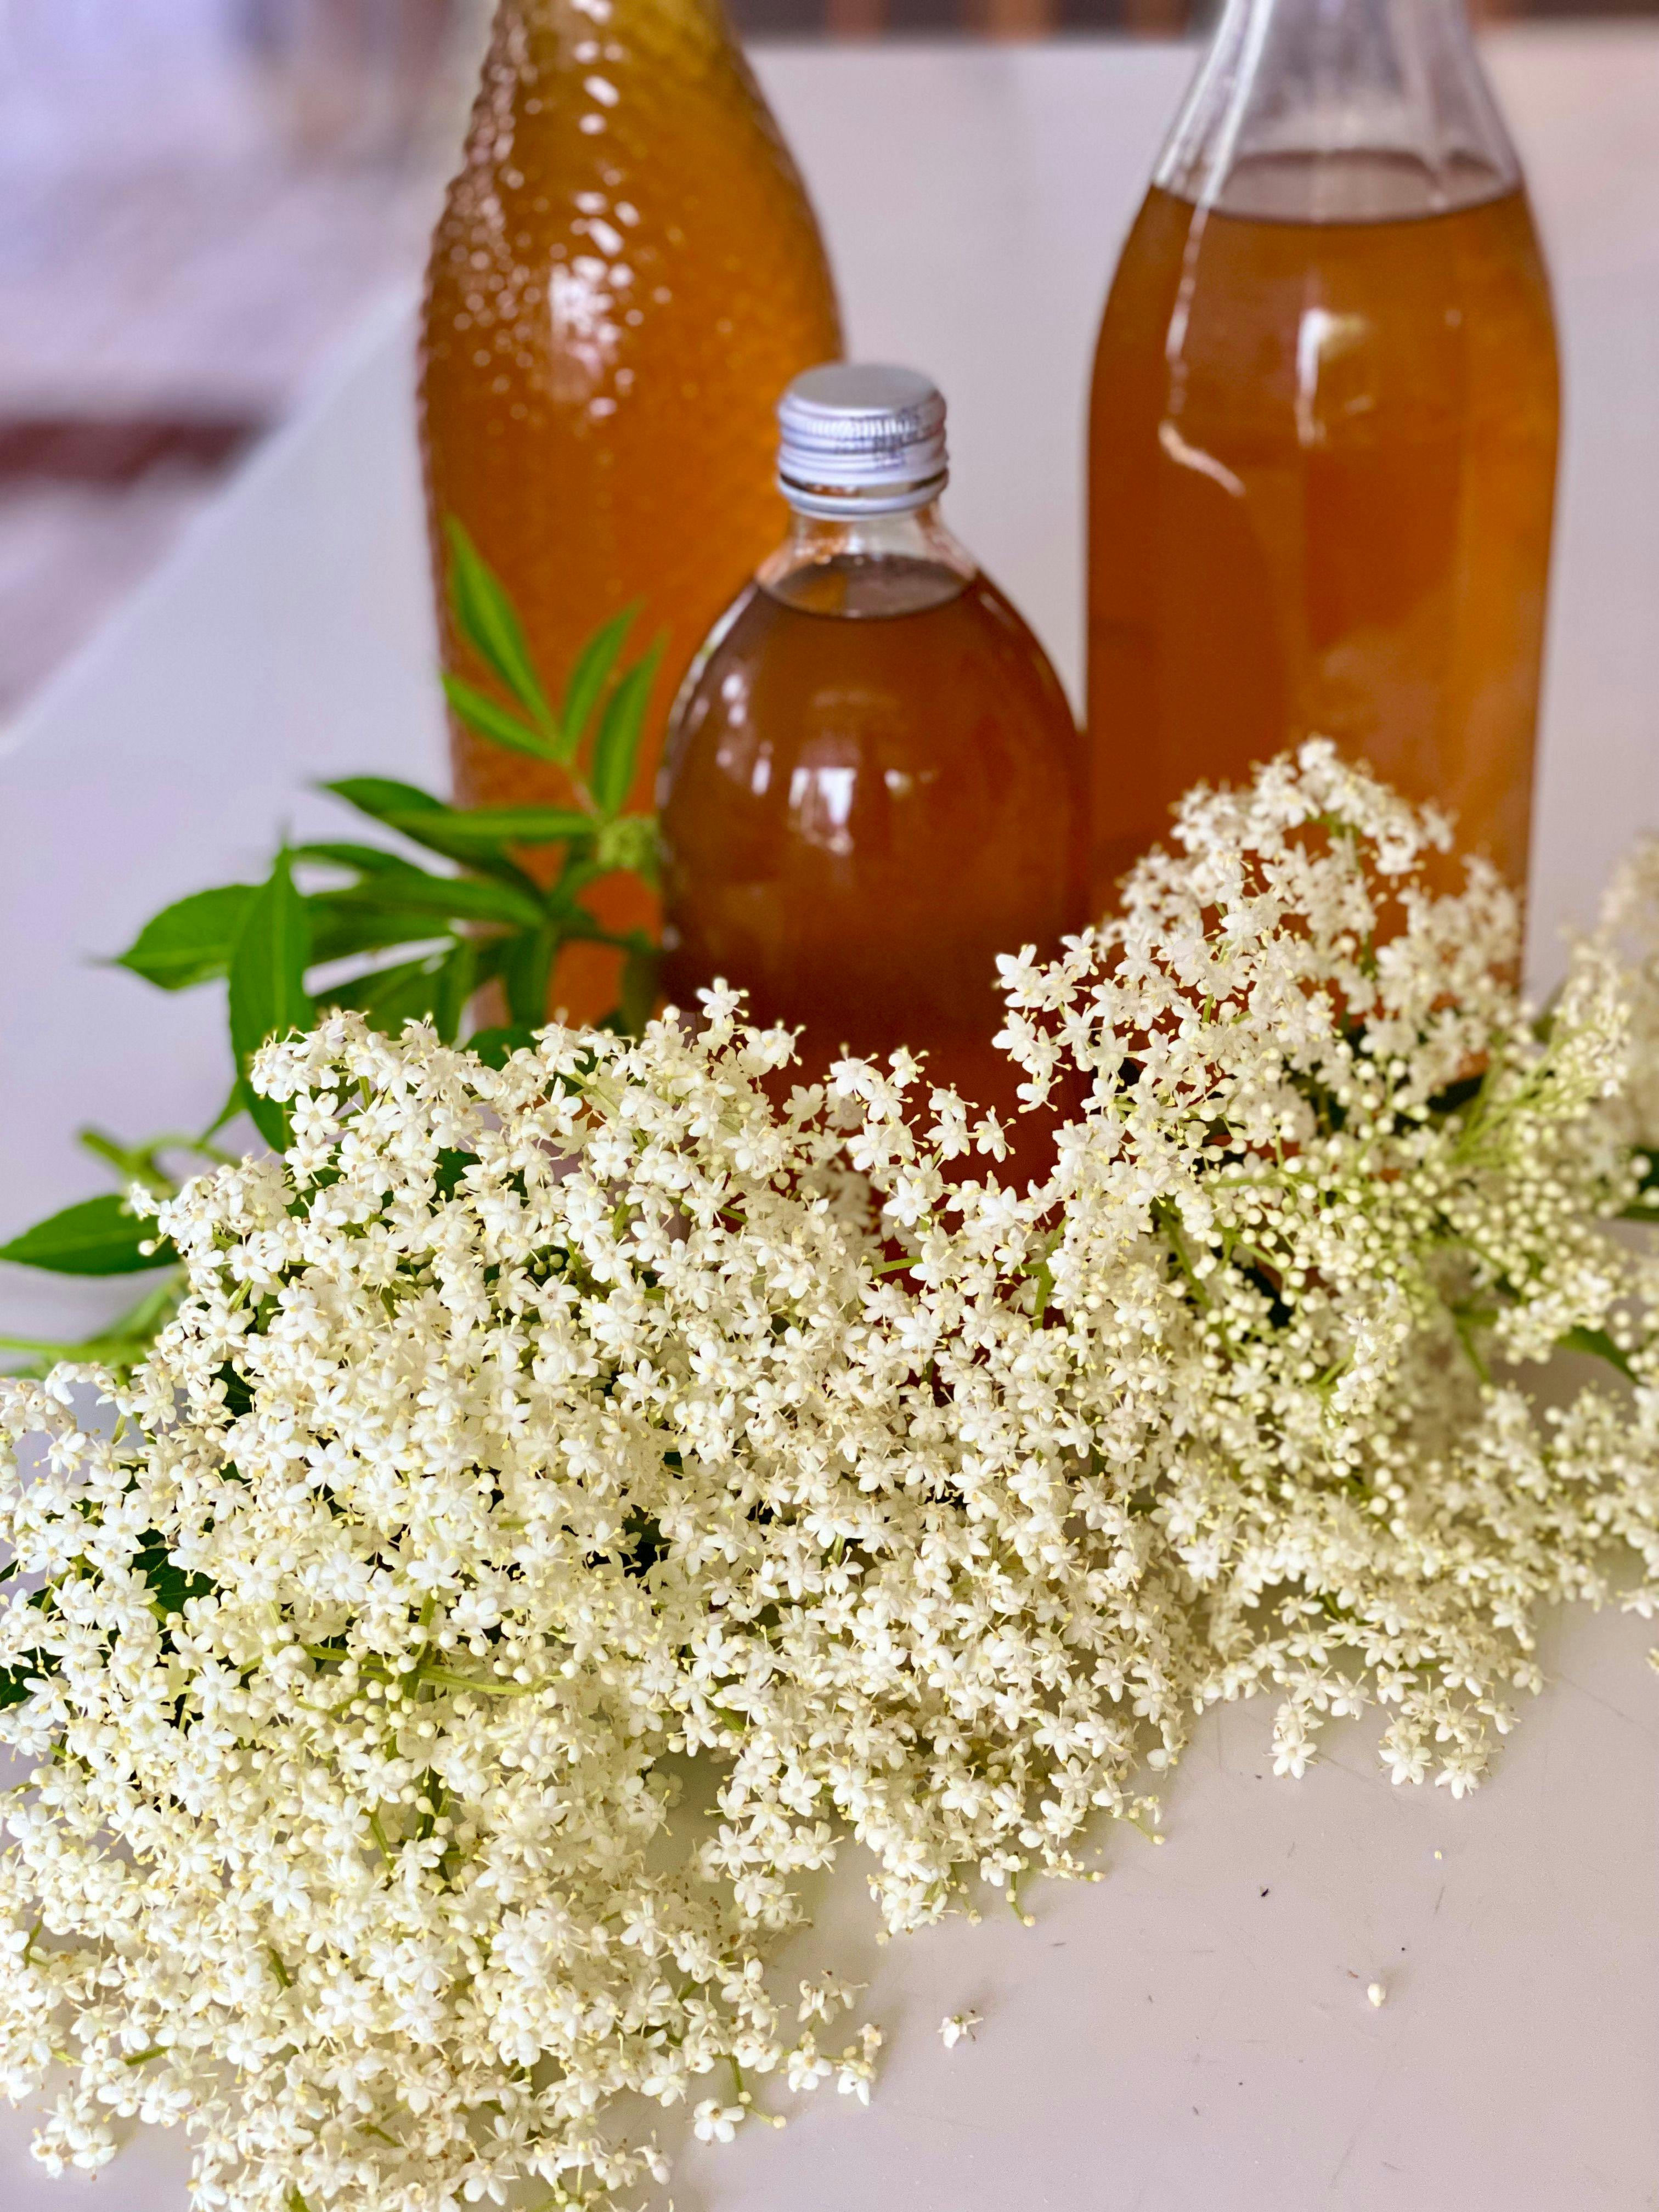 bottles of syrup with elderflowers in foreground